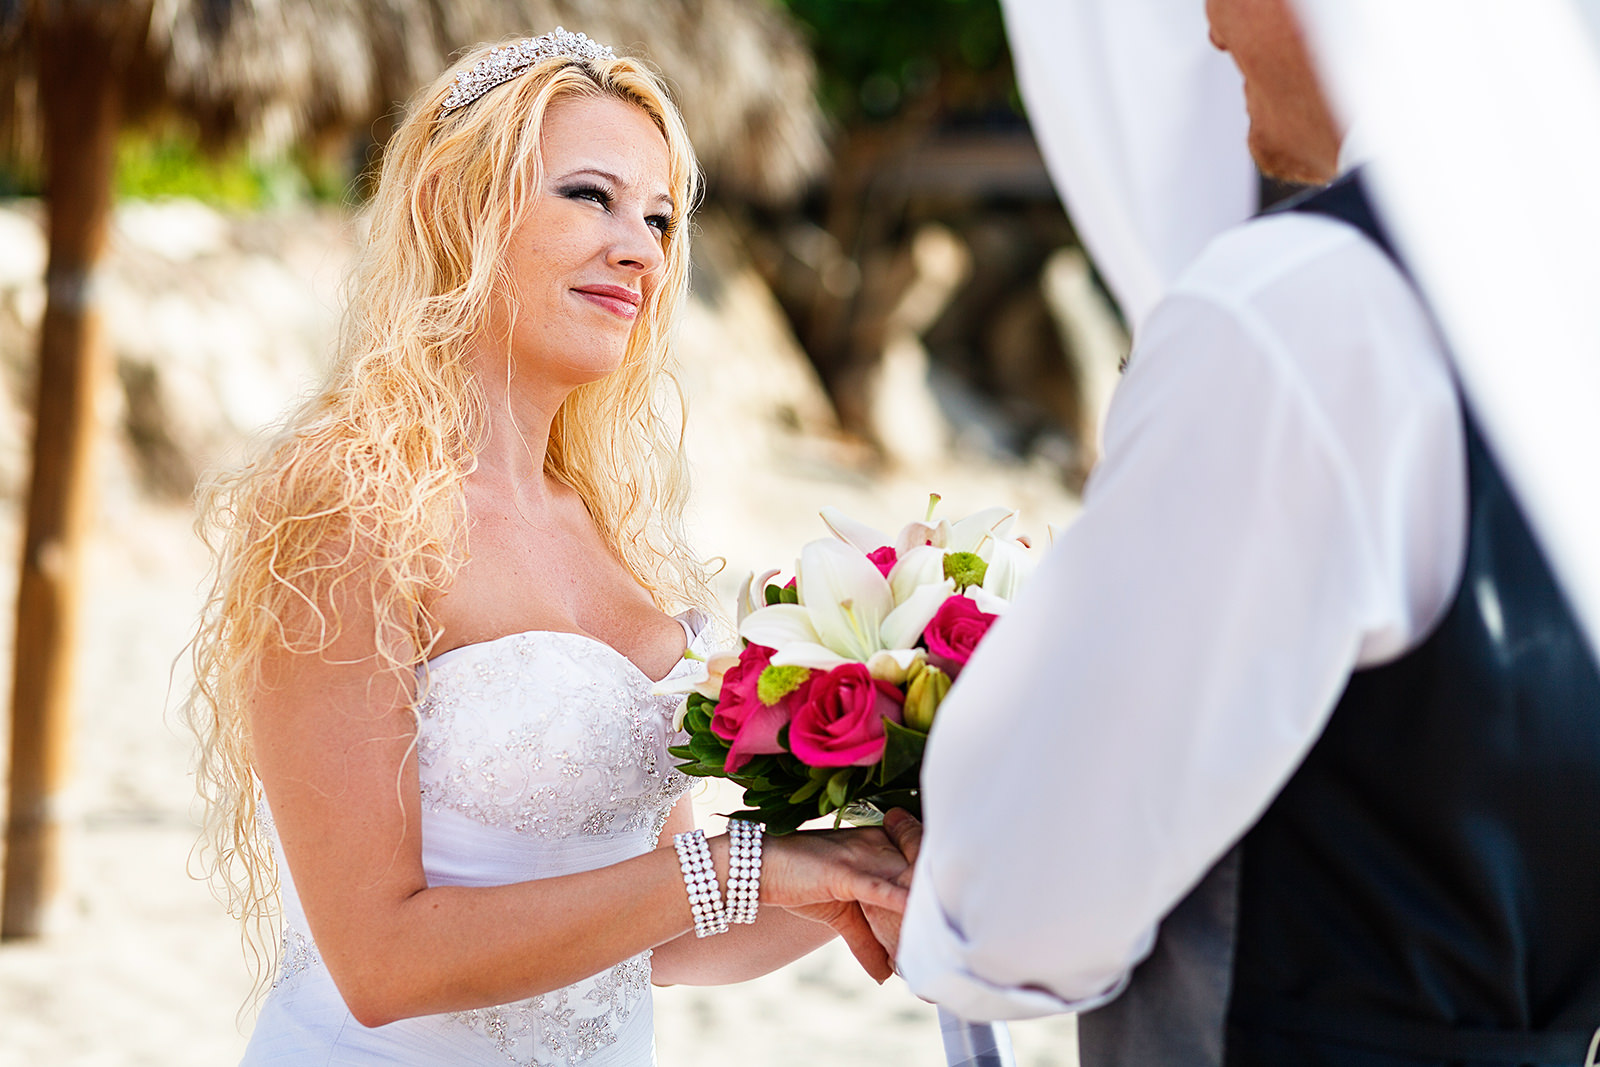 Bride with tiara looking at groom during ceremony on the beach